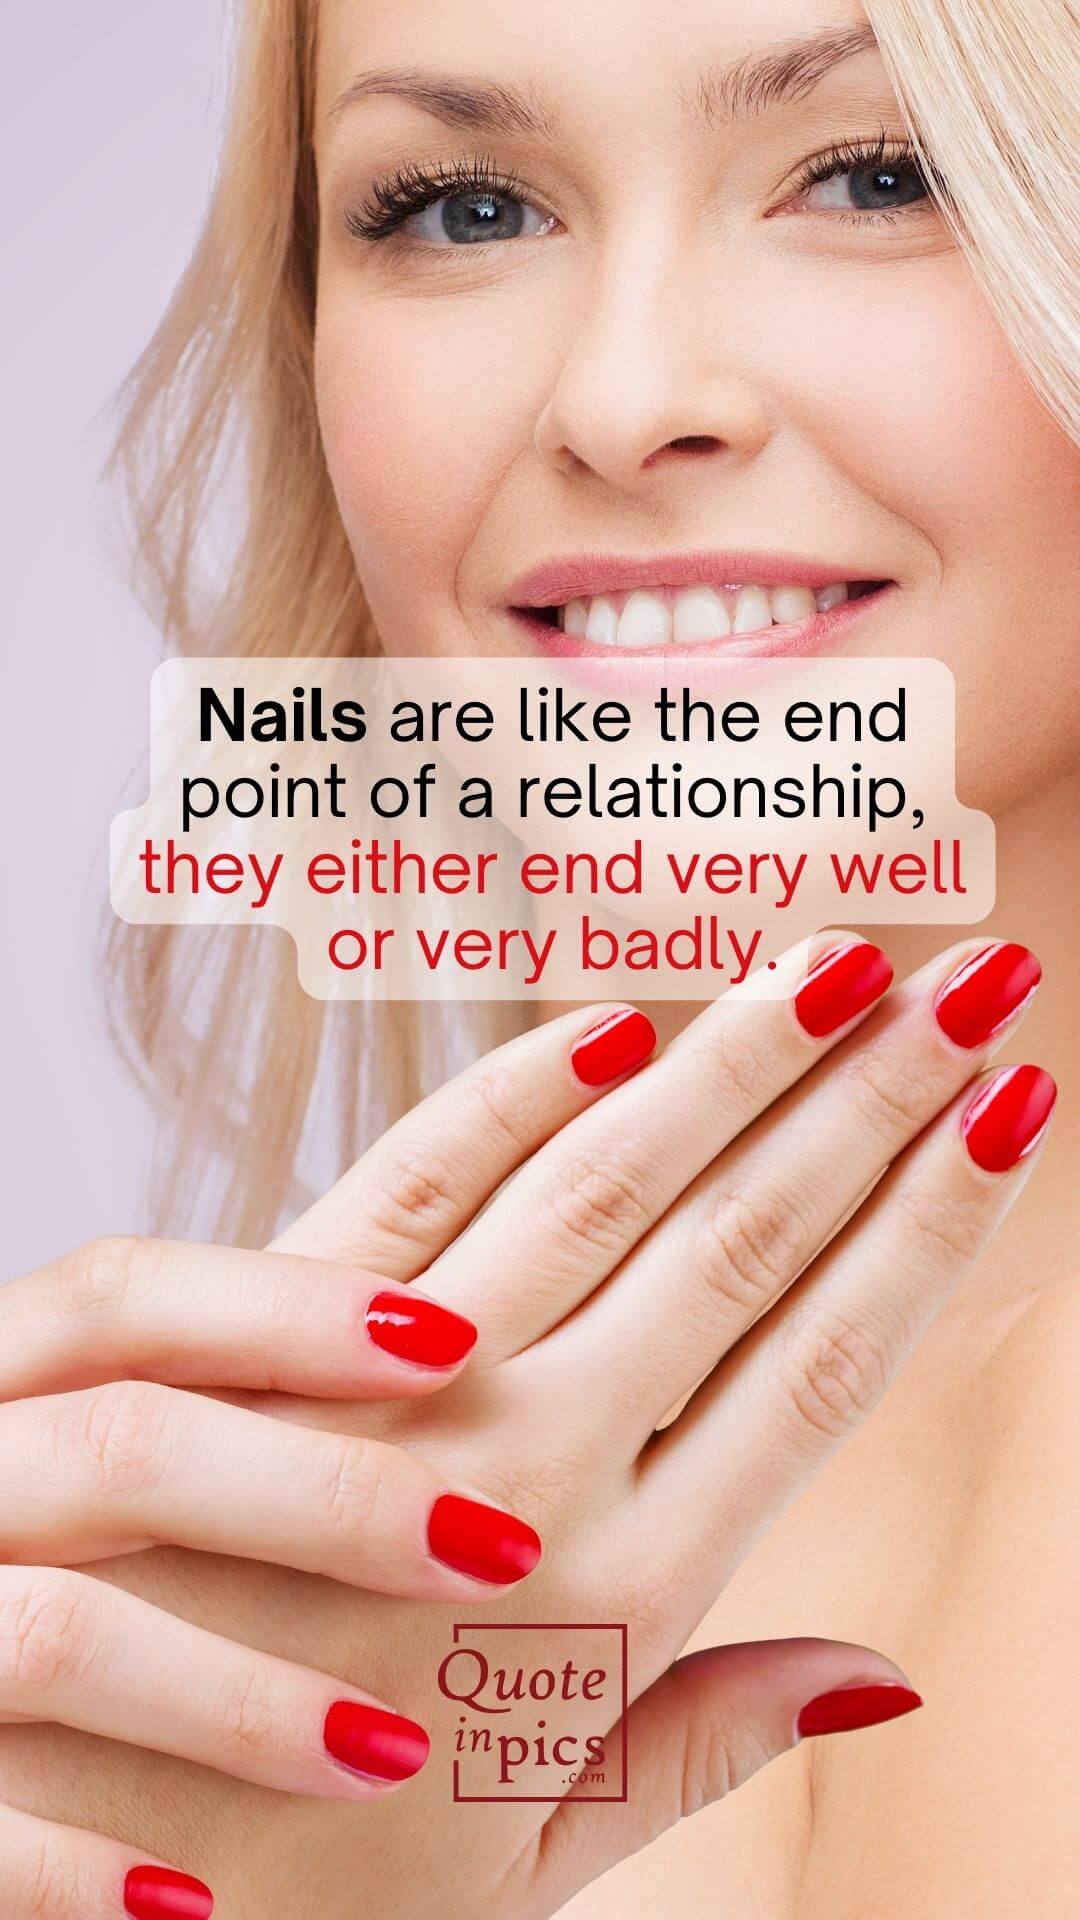 Nails are like the end point of a relationship, they either end very well or very badly